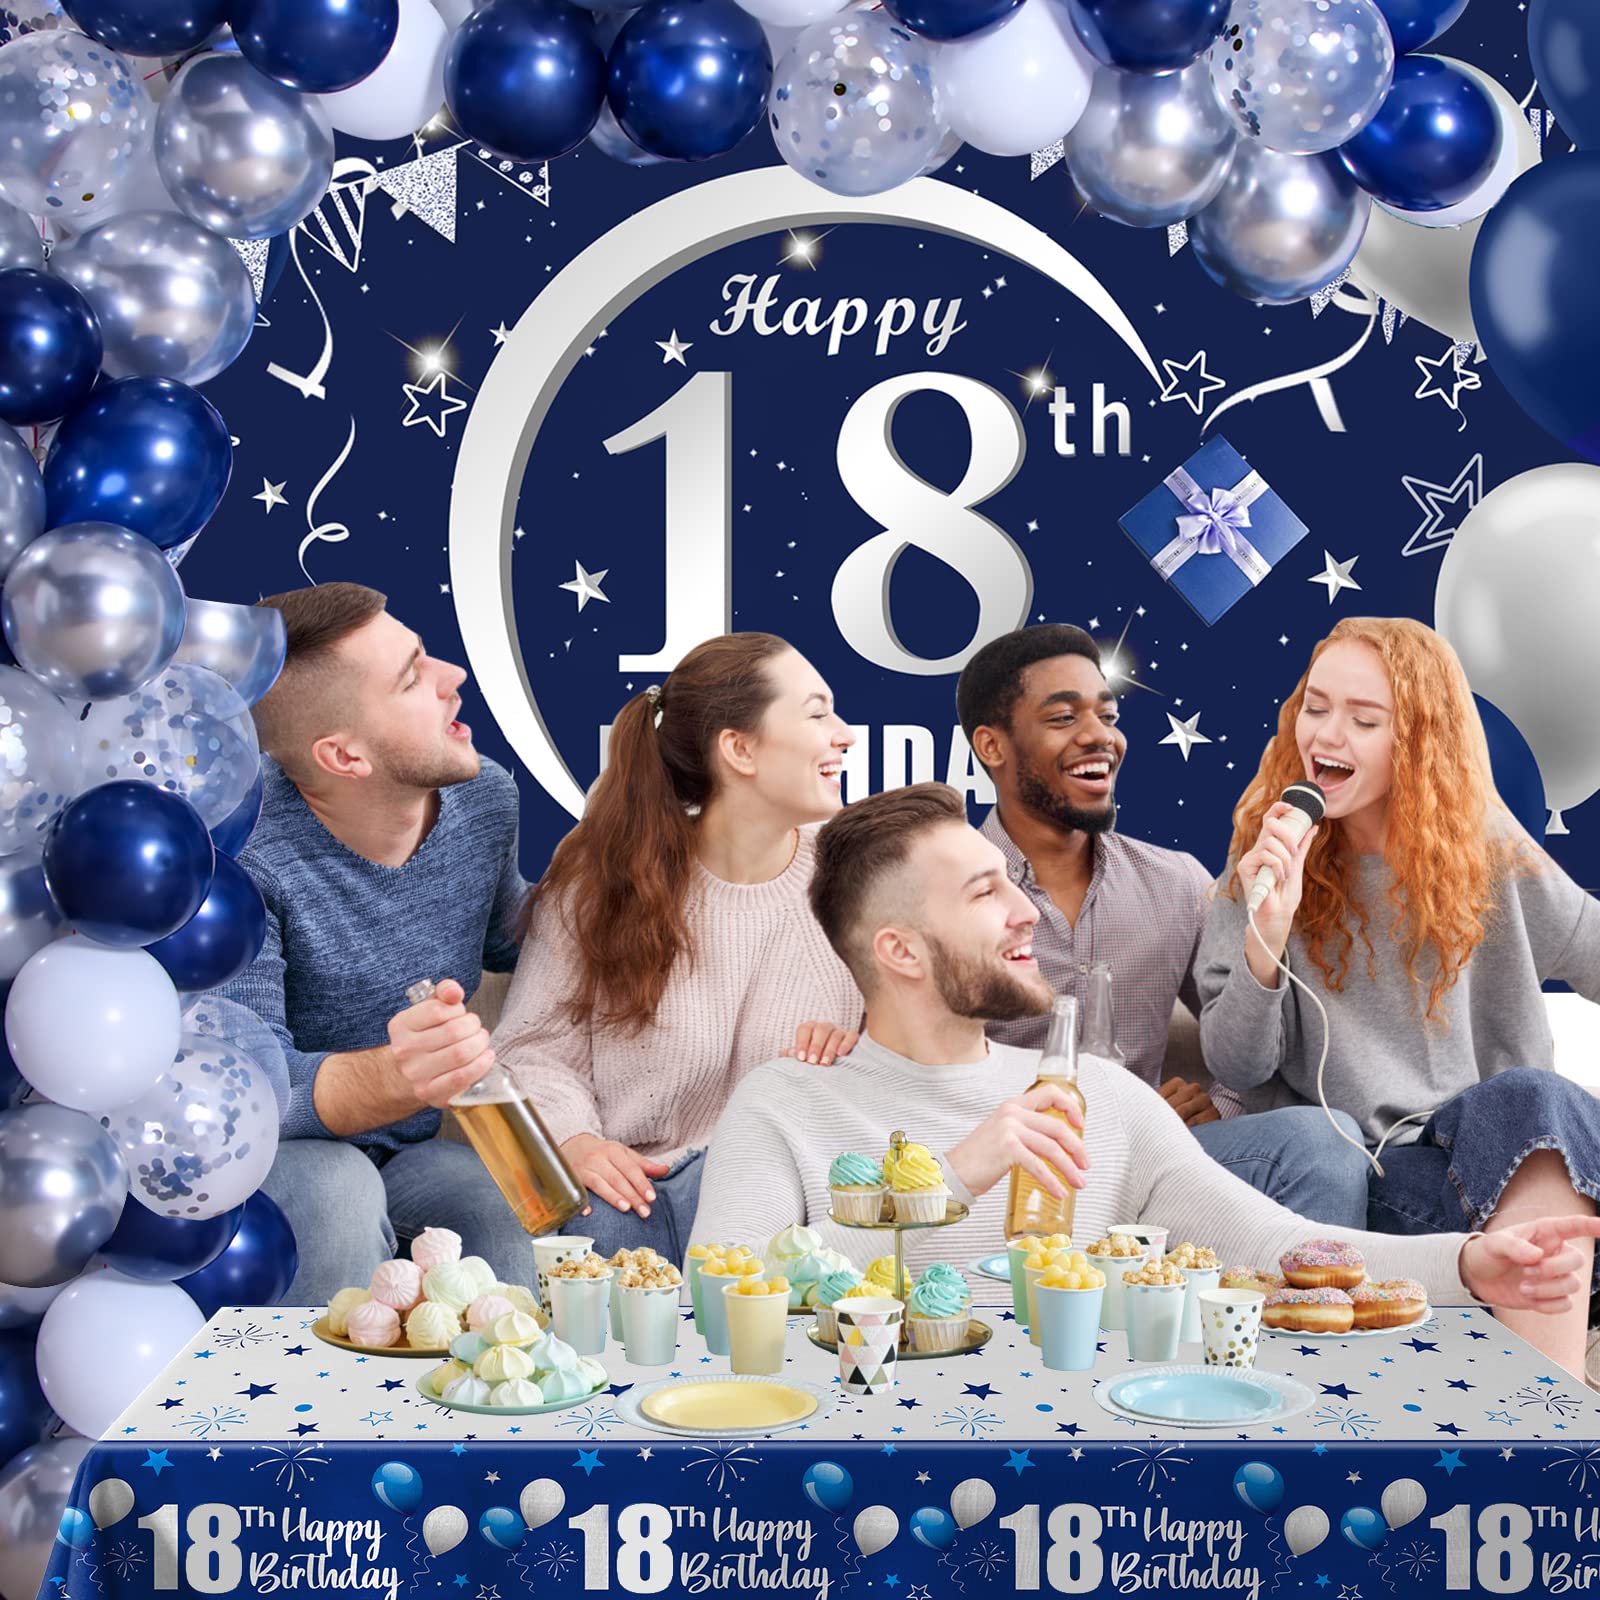 Navy Blue 18th Birthday Decorations for Boys and Girls, Happy 18th Birthday Backdrop, Tablecloth, Balloons Garland Arch Kit - 18th Birthday Banner Party Supplies Bday Decor for 18 Year Old